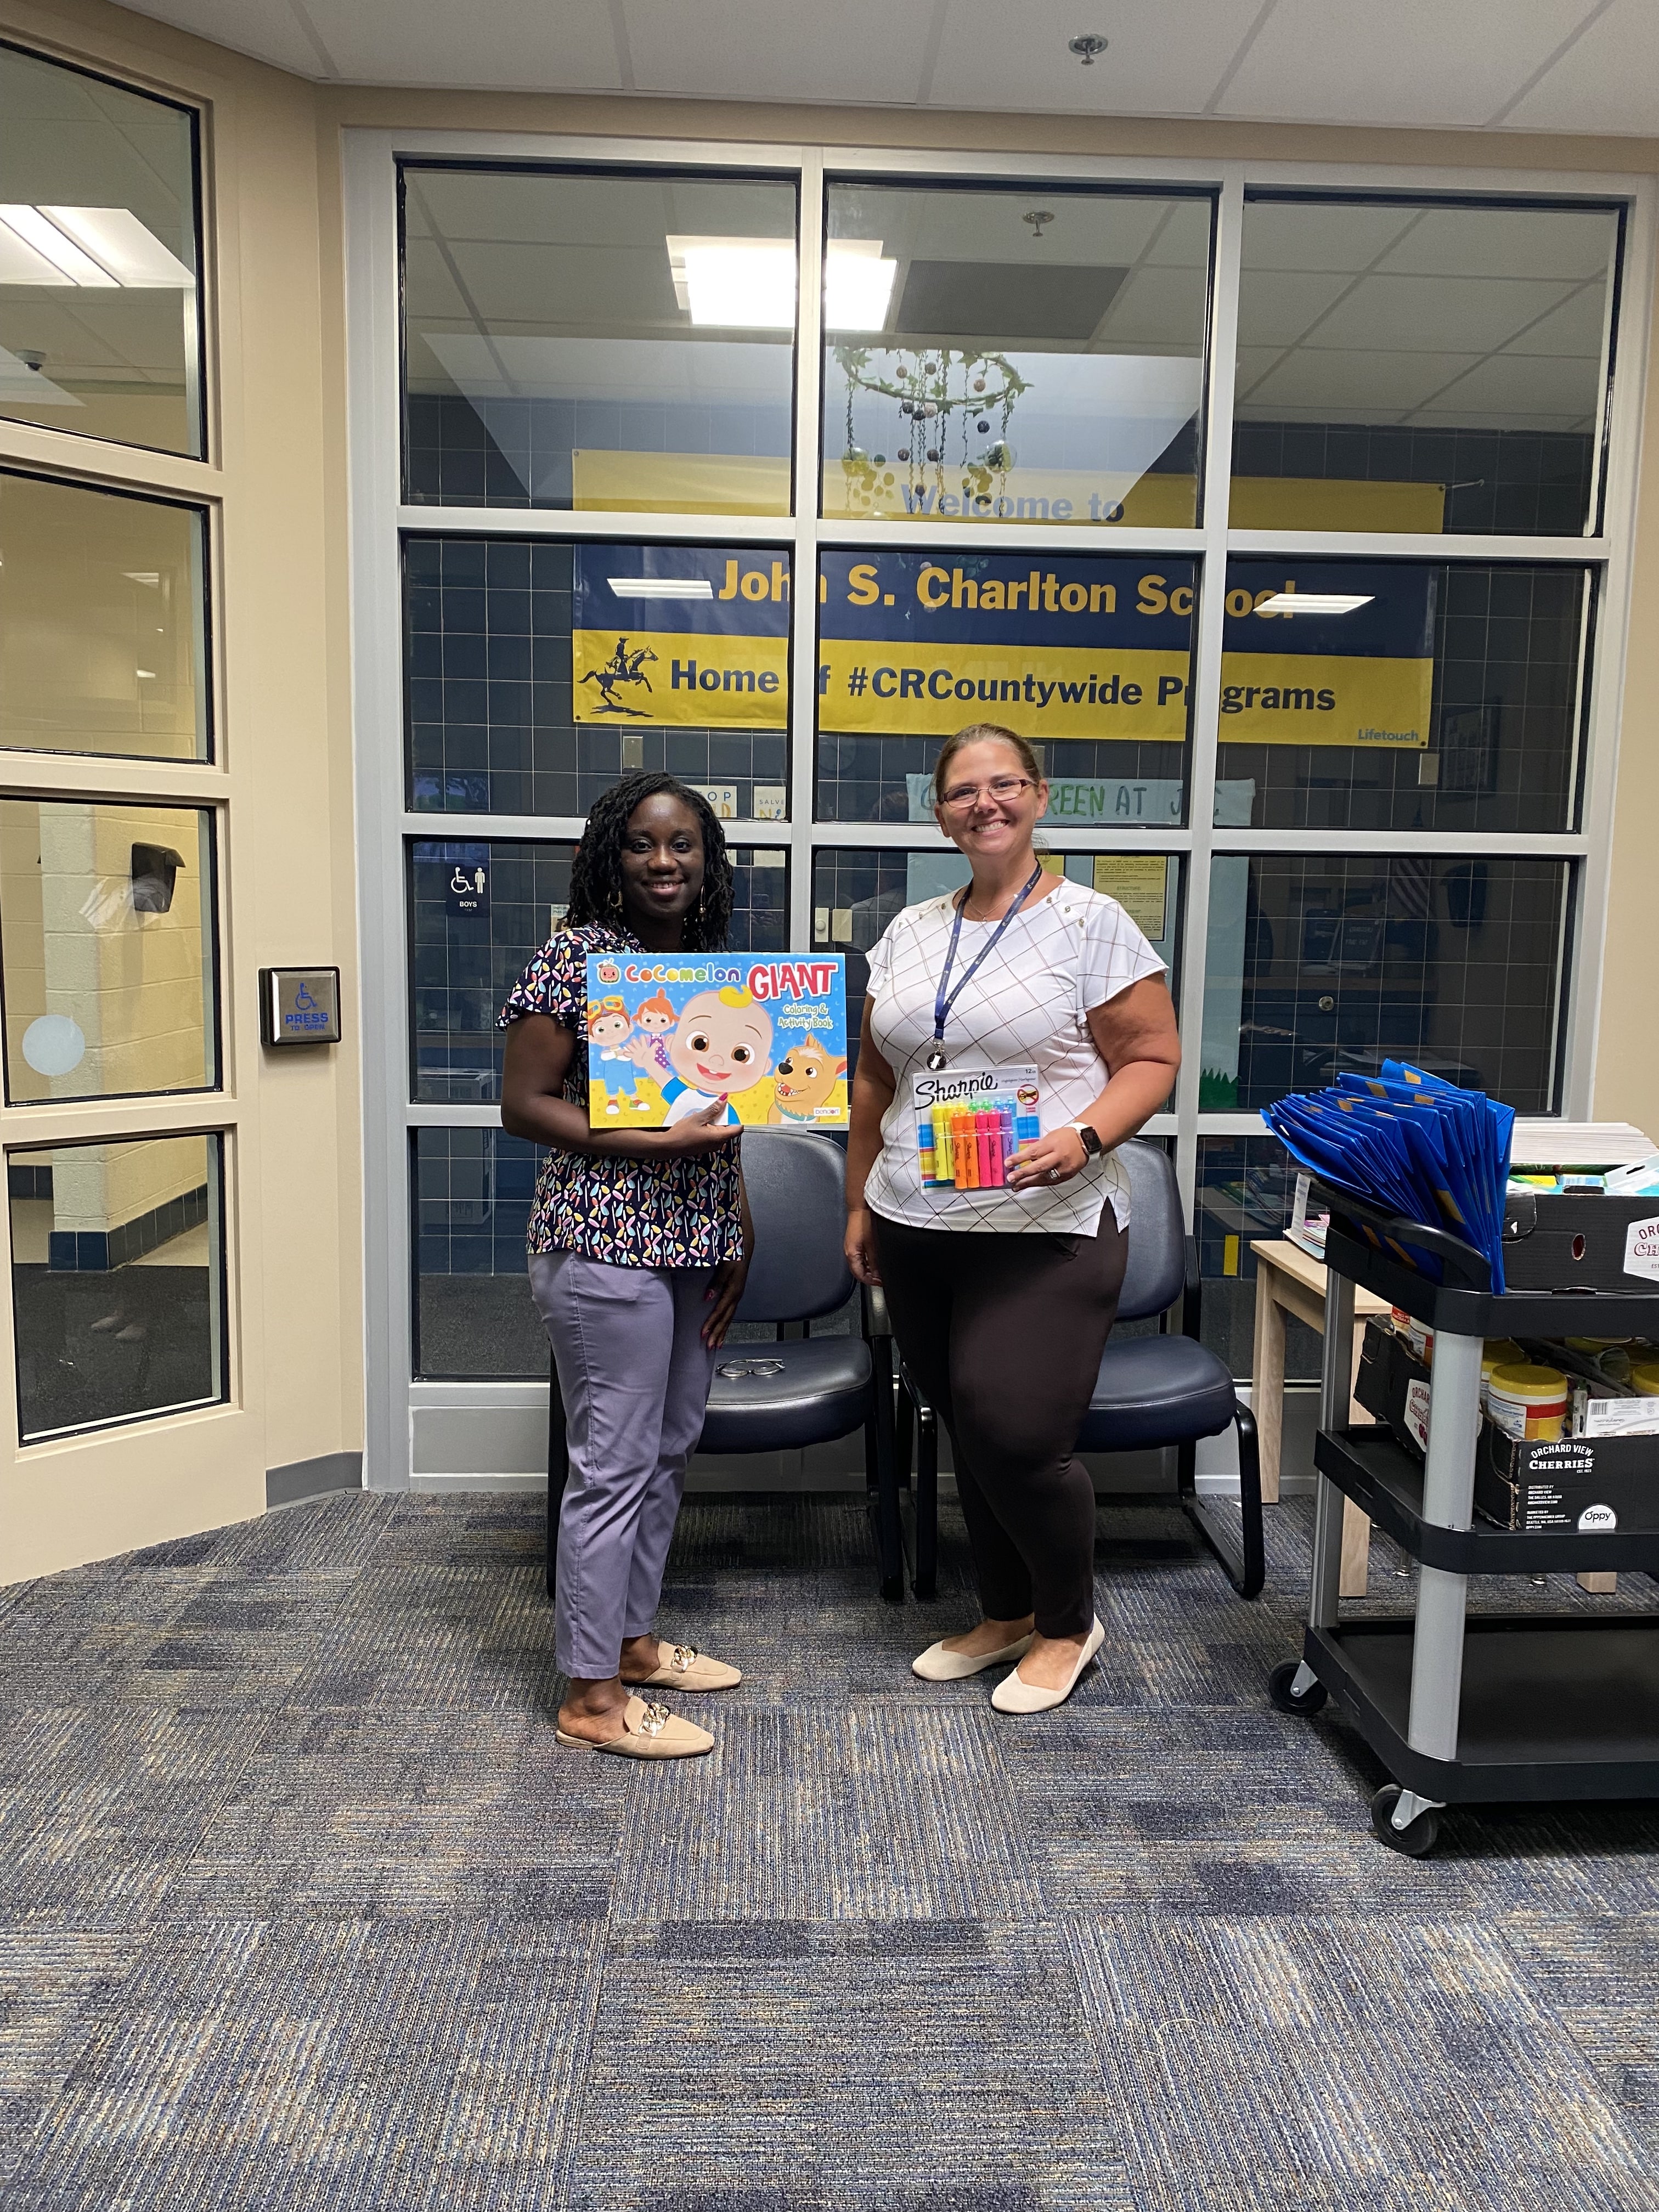 Employees Donate Art Supplies to Local Special Needs School